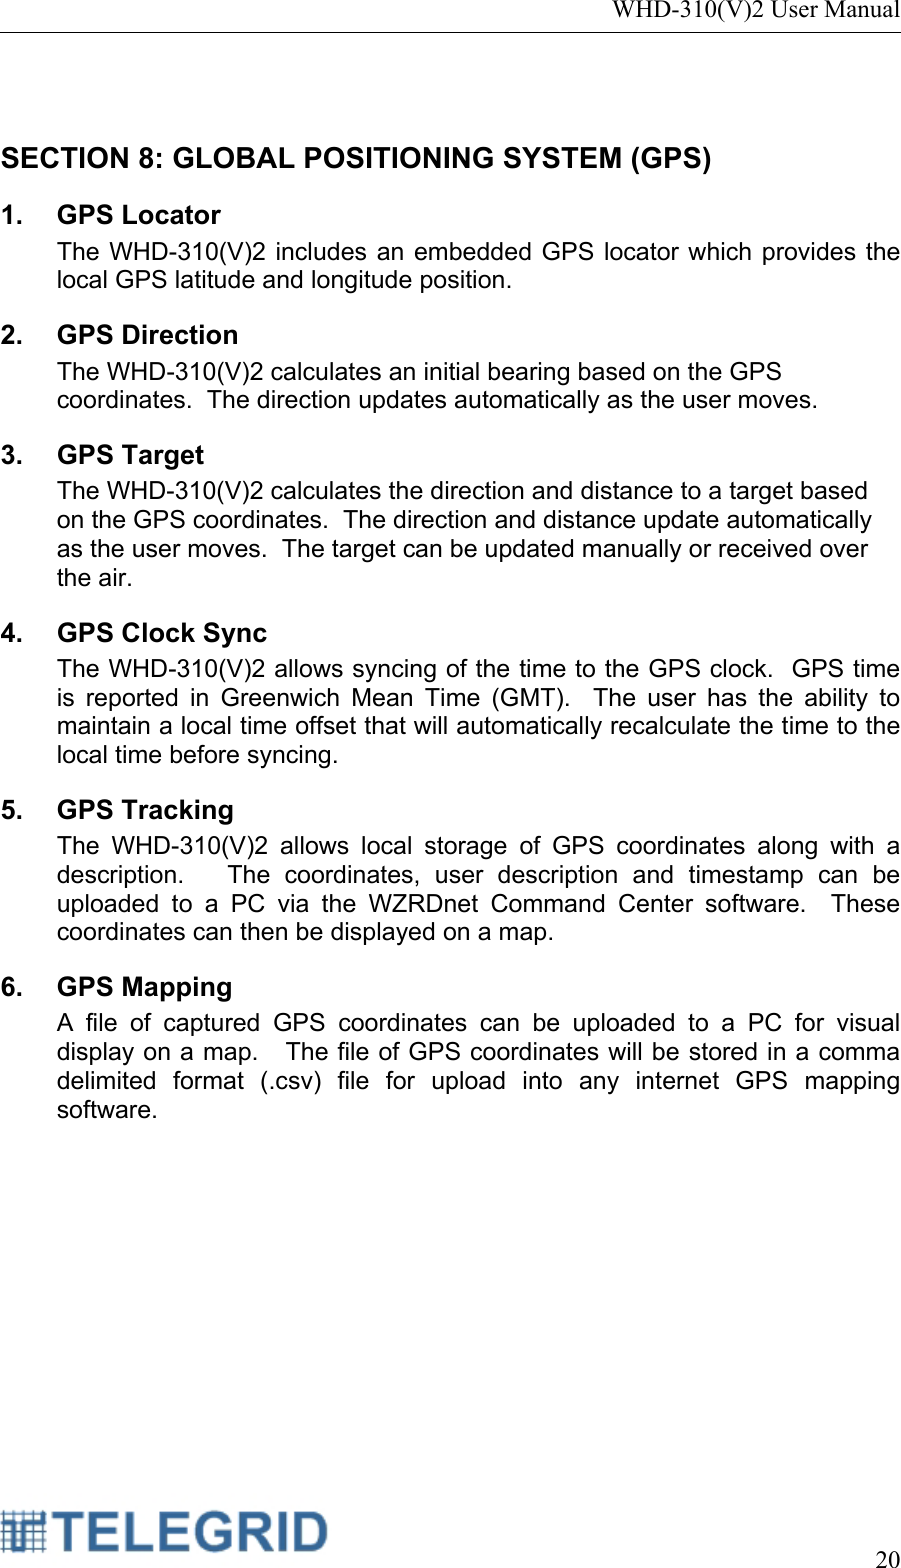 WHD-310(V)2 User Manual     20   SECTION 8: GLOBAL POSITIONING SYSTEM (GPS)  1. GPS Locator The WHD-310(V)2 includes an embedded GPS locator which provides the local GPS latitude and longitude position.   2. GPS Direction The WHD-310(V)2 calculates an initial bearing based on the GPS coordinates.  The direction updates automatically as the user moves. 3. GPS Target The WHD-310(V)2 calculates the direction and distance to a target based on the GPS coordinates.  The direction and distance update automatically as the user moves.  The target can be updated manually or received over the air. 4. GPS Clock Sync The WHD-310(V)2 allows syncing of the time to the GPS clock.  GPS time is reported in Greenwich Mean Time (GMT).  The user has the ability to maintain a local time offset that will automatically recalculate the time to the local time before syncing. 5. GPS Tracking The WHD-310(V)2 allows local storage of GPS coordinates along with a description.   The coordinates, user description and timestamp can be uploaded to a PC via the WZRDnet Command Center software.  These coordinates can then be displayed on a map. 6. GPS Mapping A file of captured GPS coordinates can be uploaded to a PC for visual display on a map.   The file of GPS coordinates will be stored in a comma delimited format (.csv) file for upload into any internet GPS mapping software. 